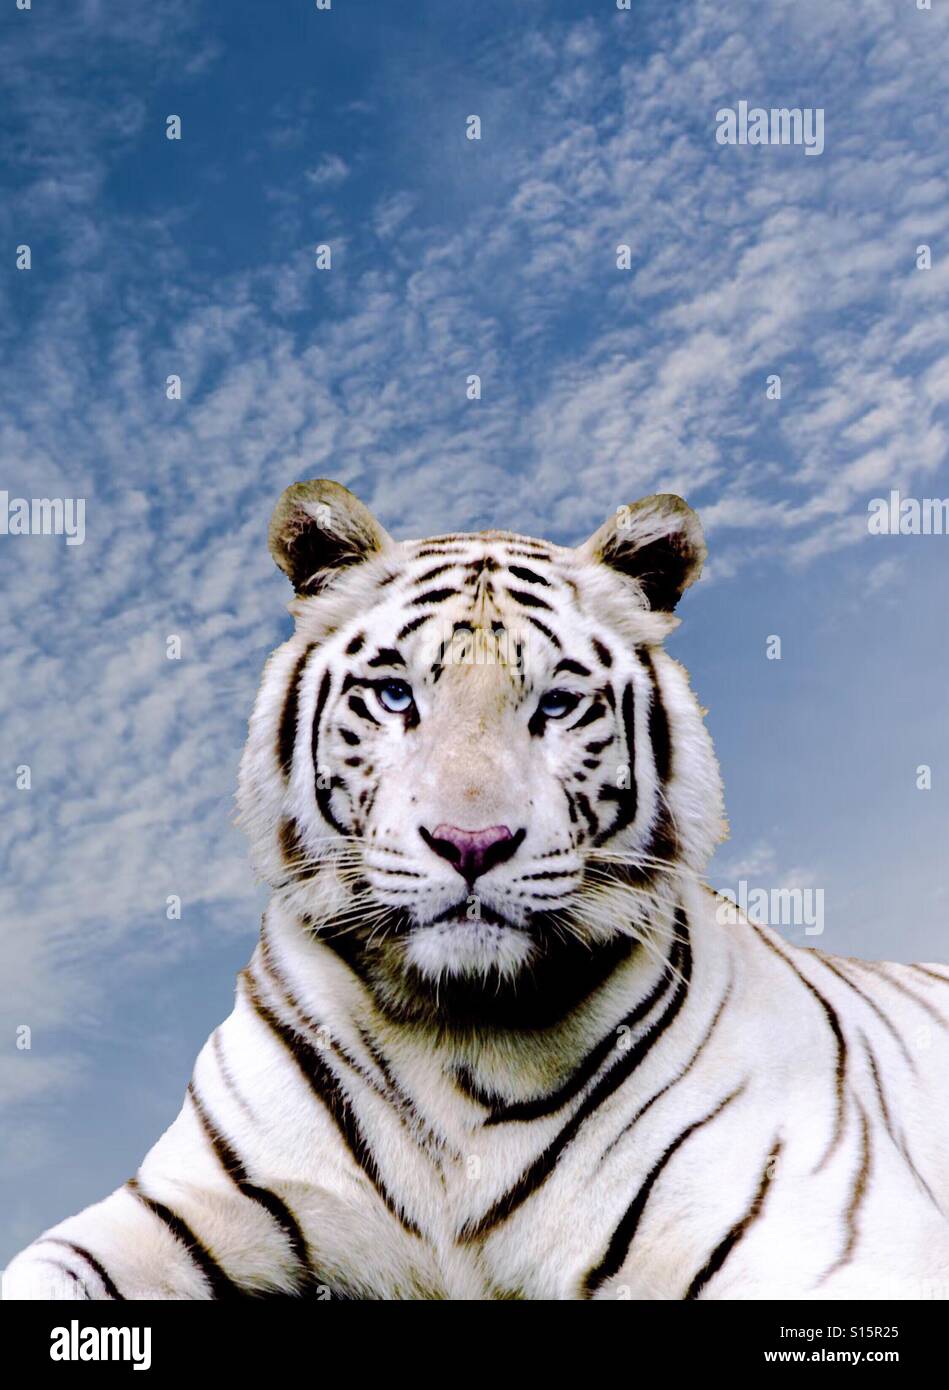 The awesome beauty of a white tiger, captured in a moment when his eyes met mine. Stock Photo